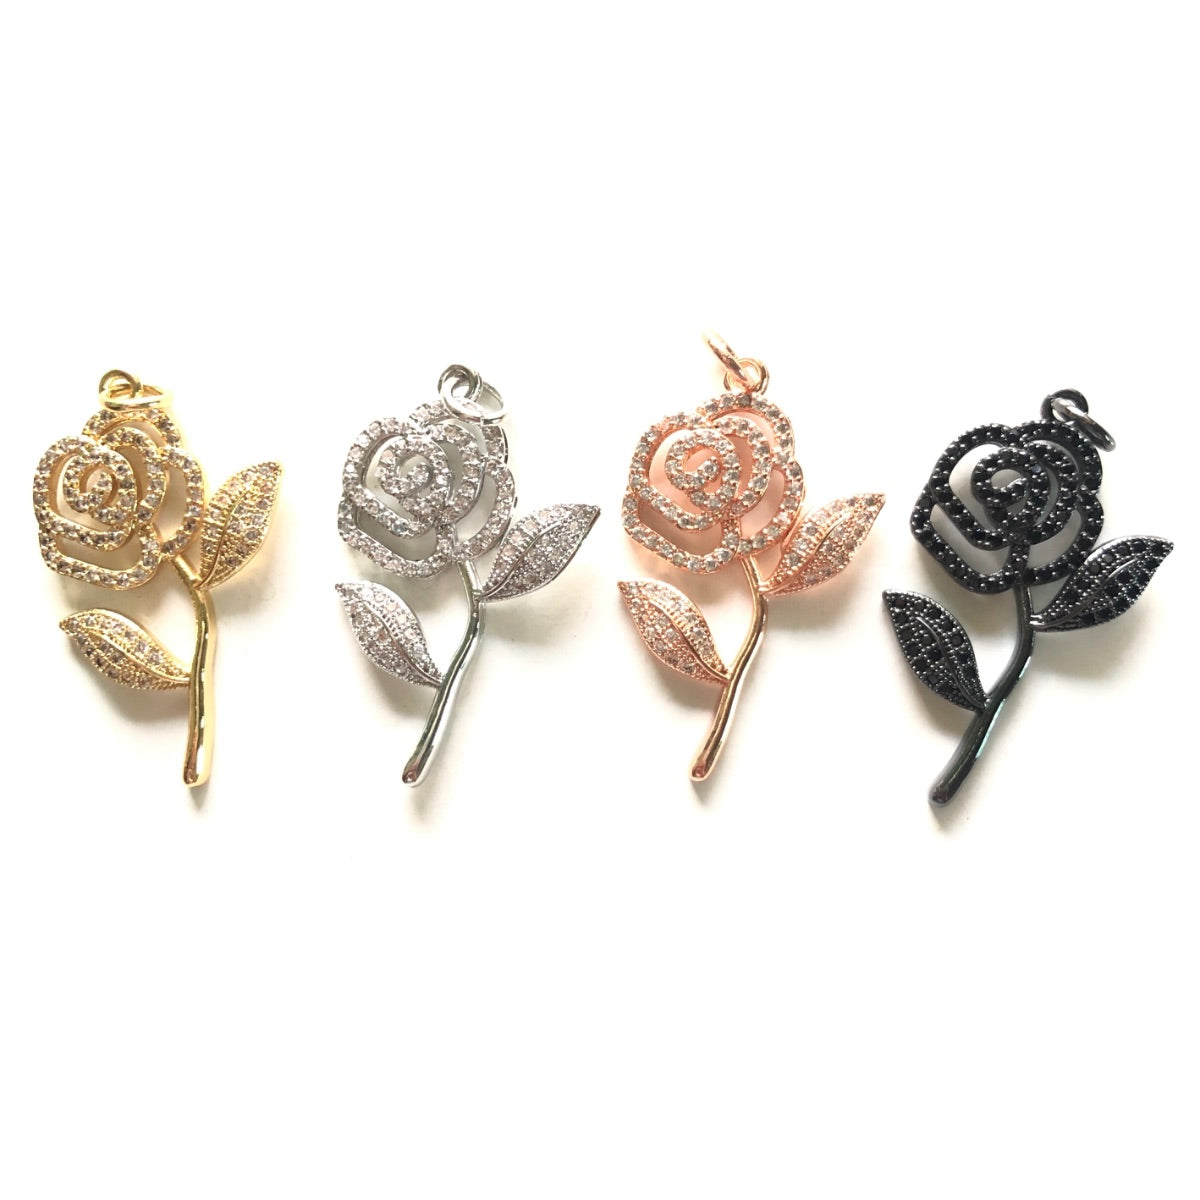 10pcs/lot 34*22mm CZ Paved Rose Flower Charms CZ Paved Charms Flowers Charms Beads Beyond